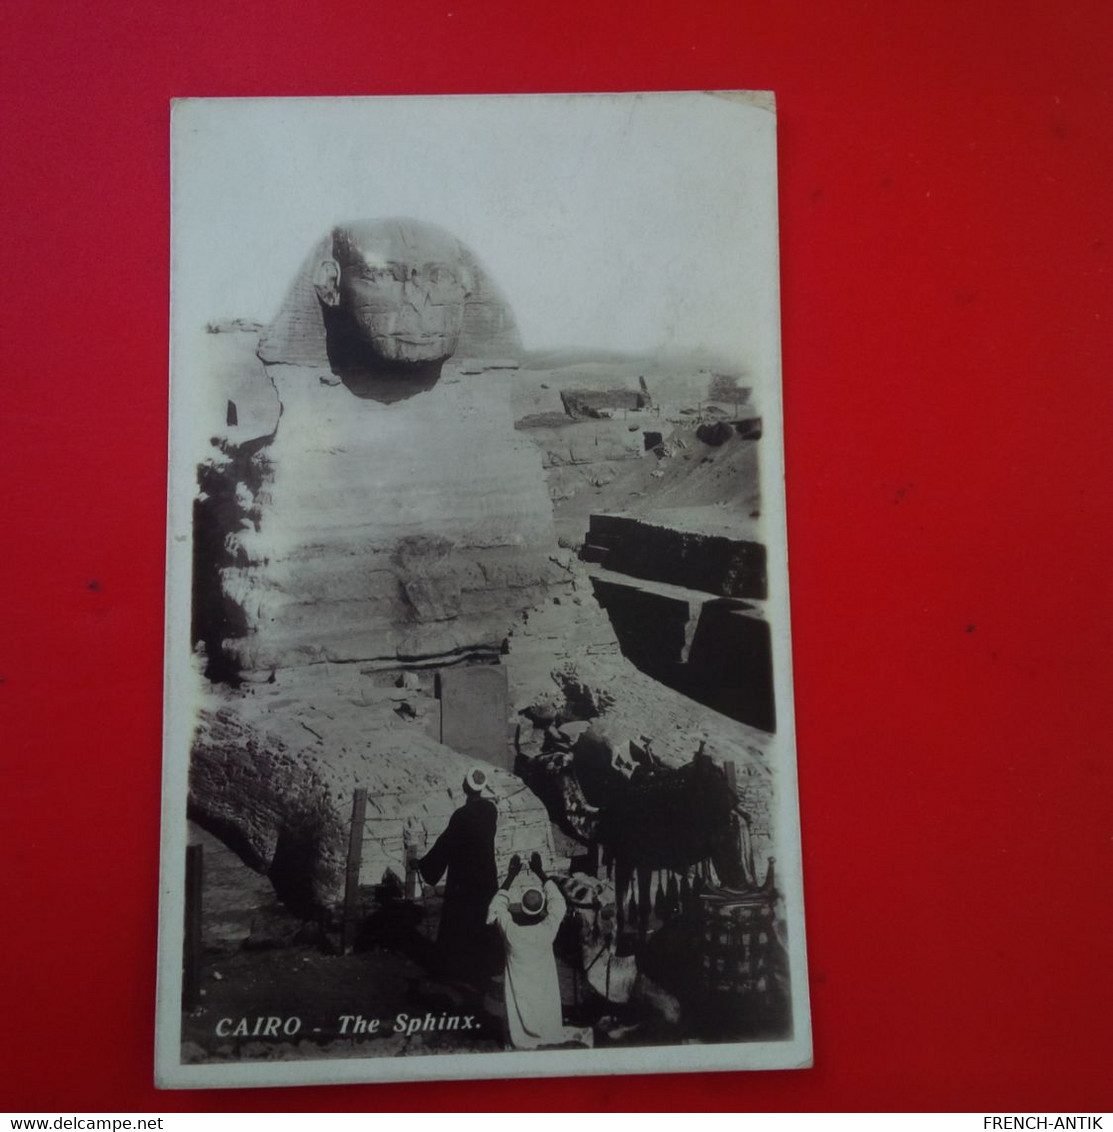 CAIRO THE SPHINX - Le Caire